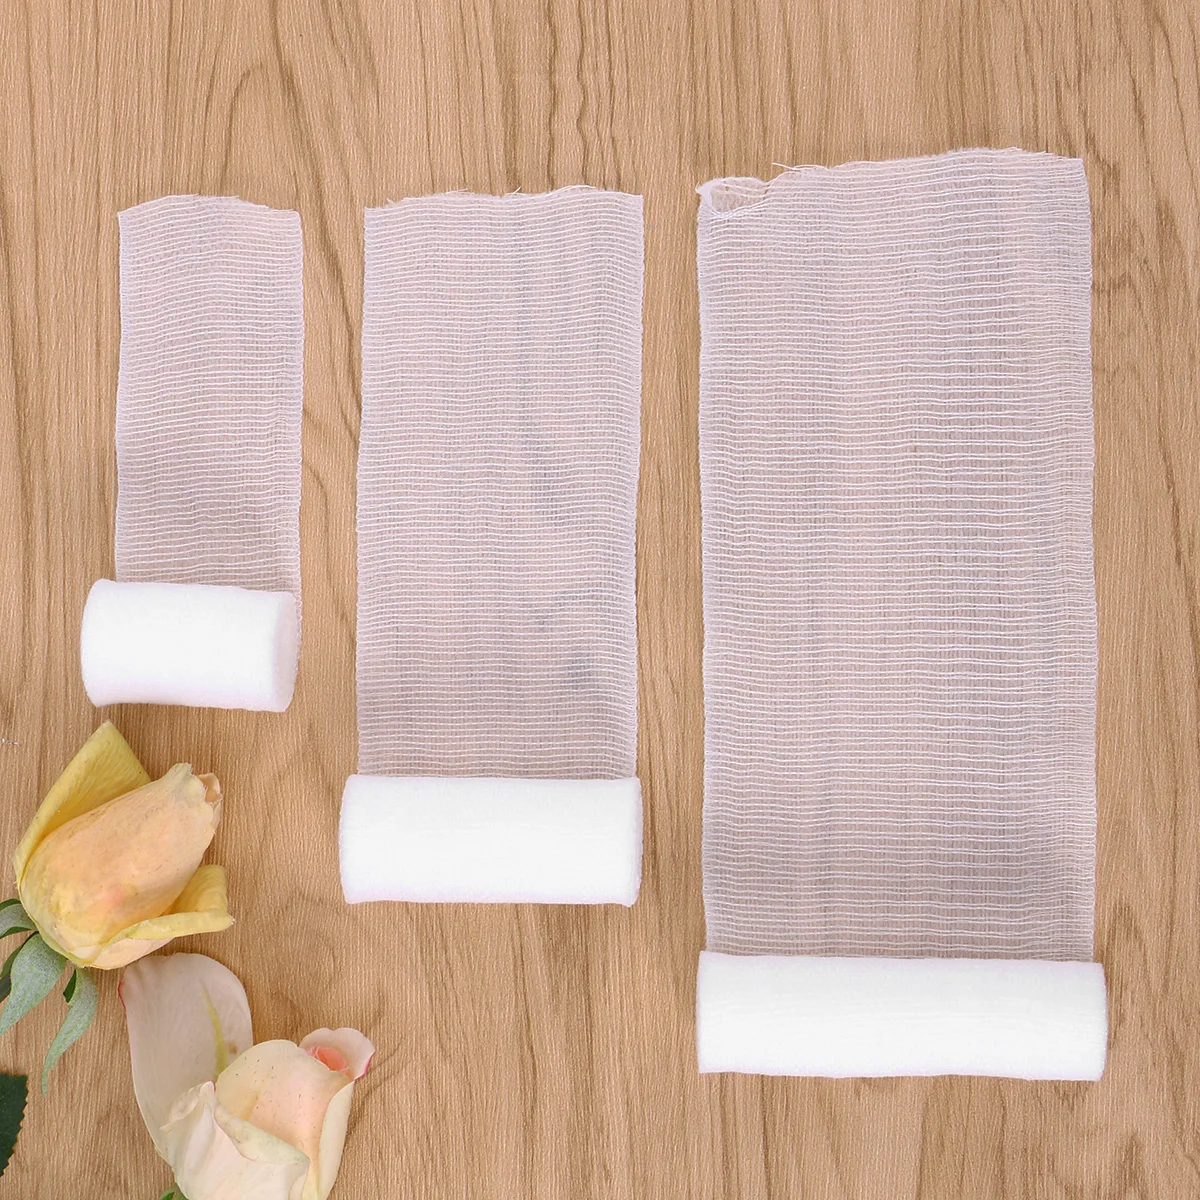 

3 Rolls Bandages Gauze Rolls 4 Inch Sterile Wound Care Elastic Gauze Bandage Rolls Tape Bandage Wrap Tape